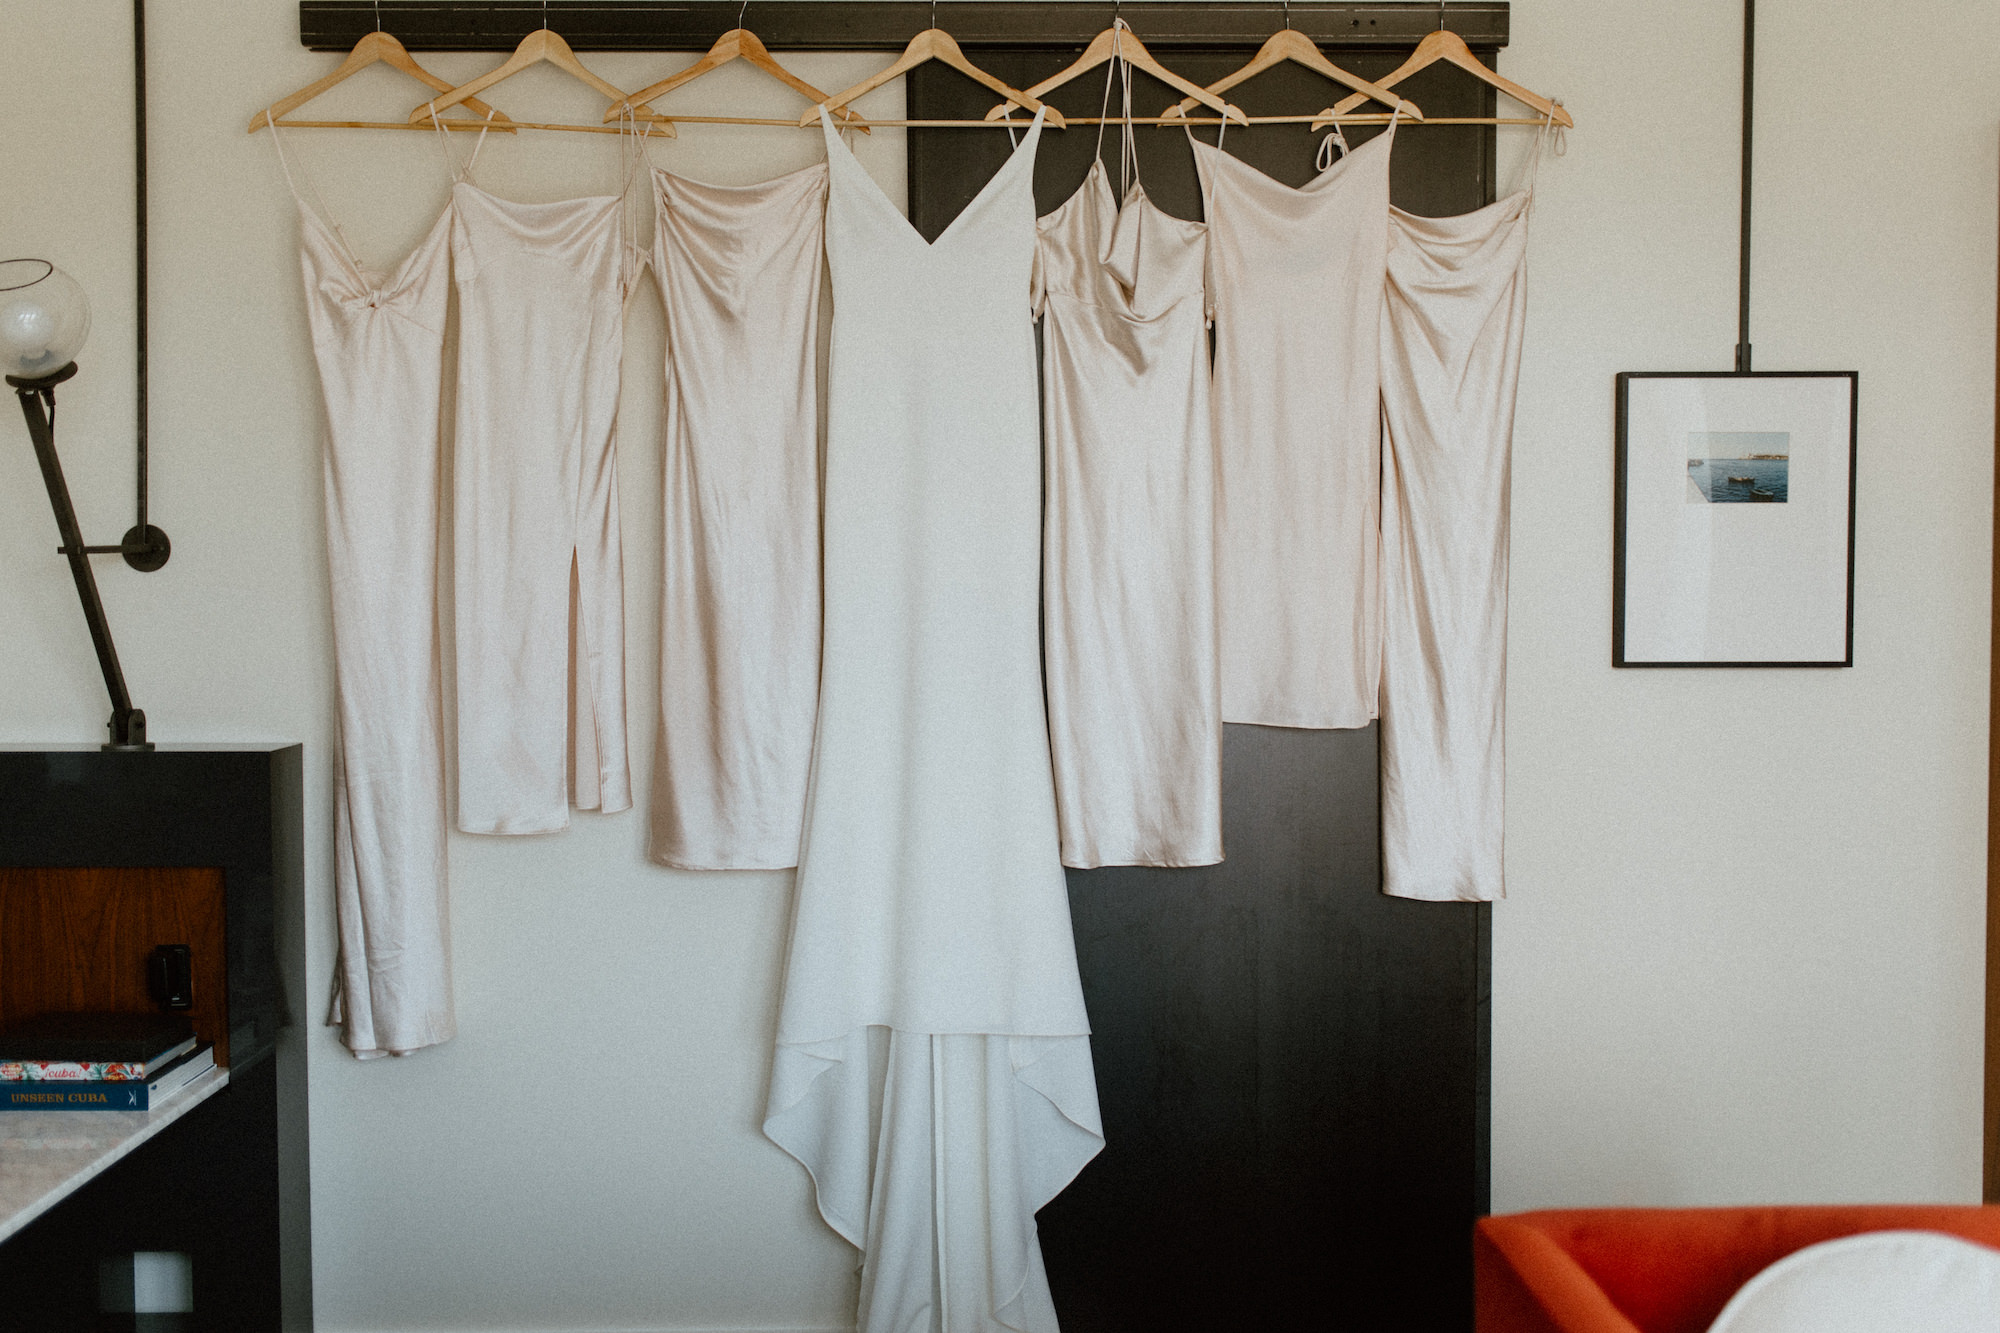 White Satin Simple Classic Made With Love Bridal Wedding Dress on Hanger with Cream Midi Bridesmaids Dress Ideas Hanging Portrait